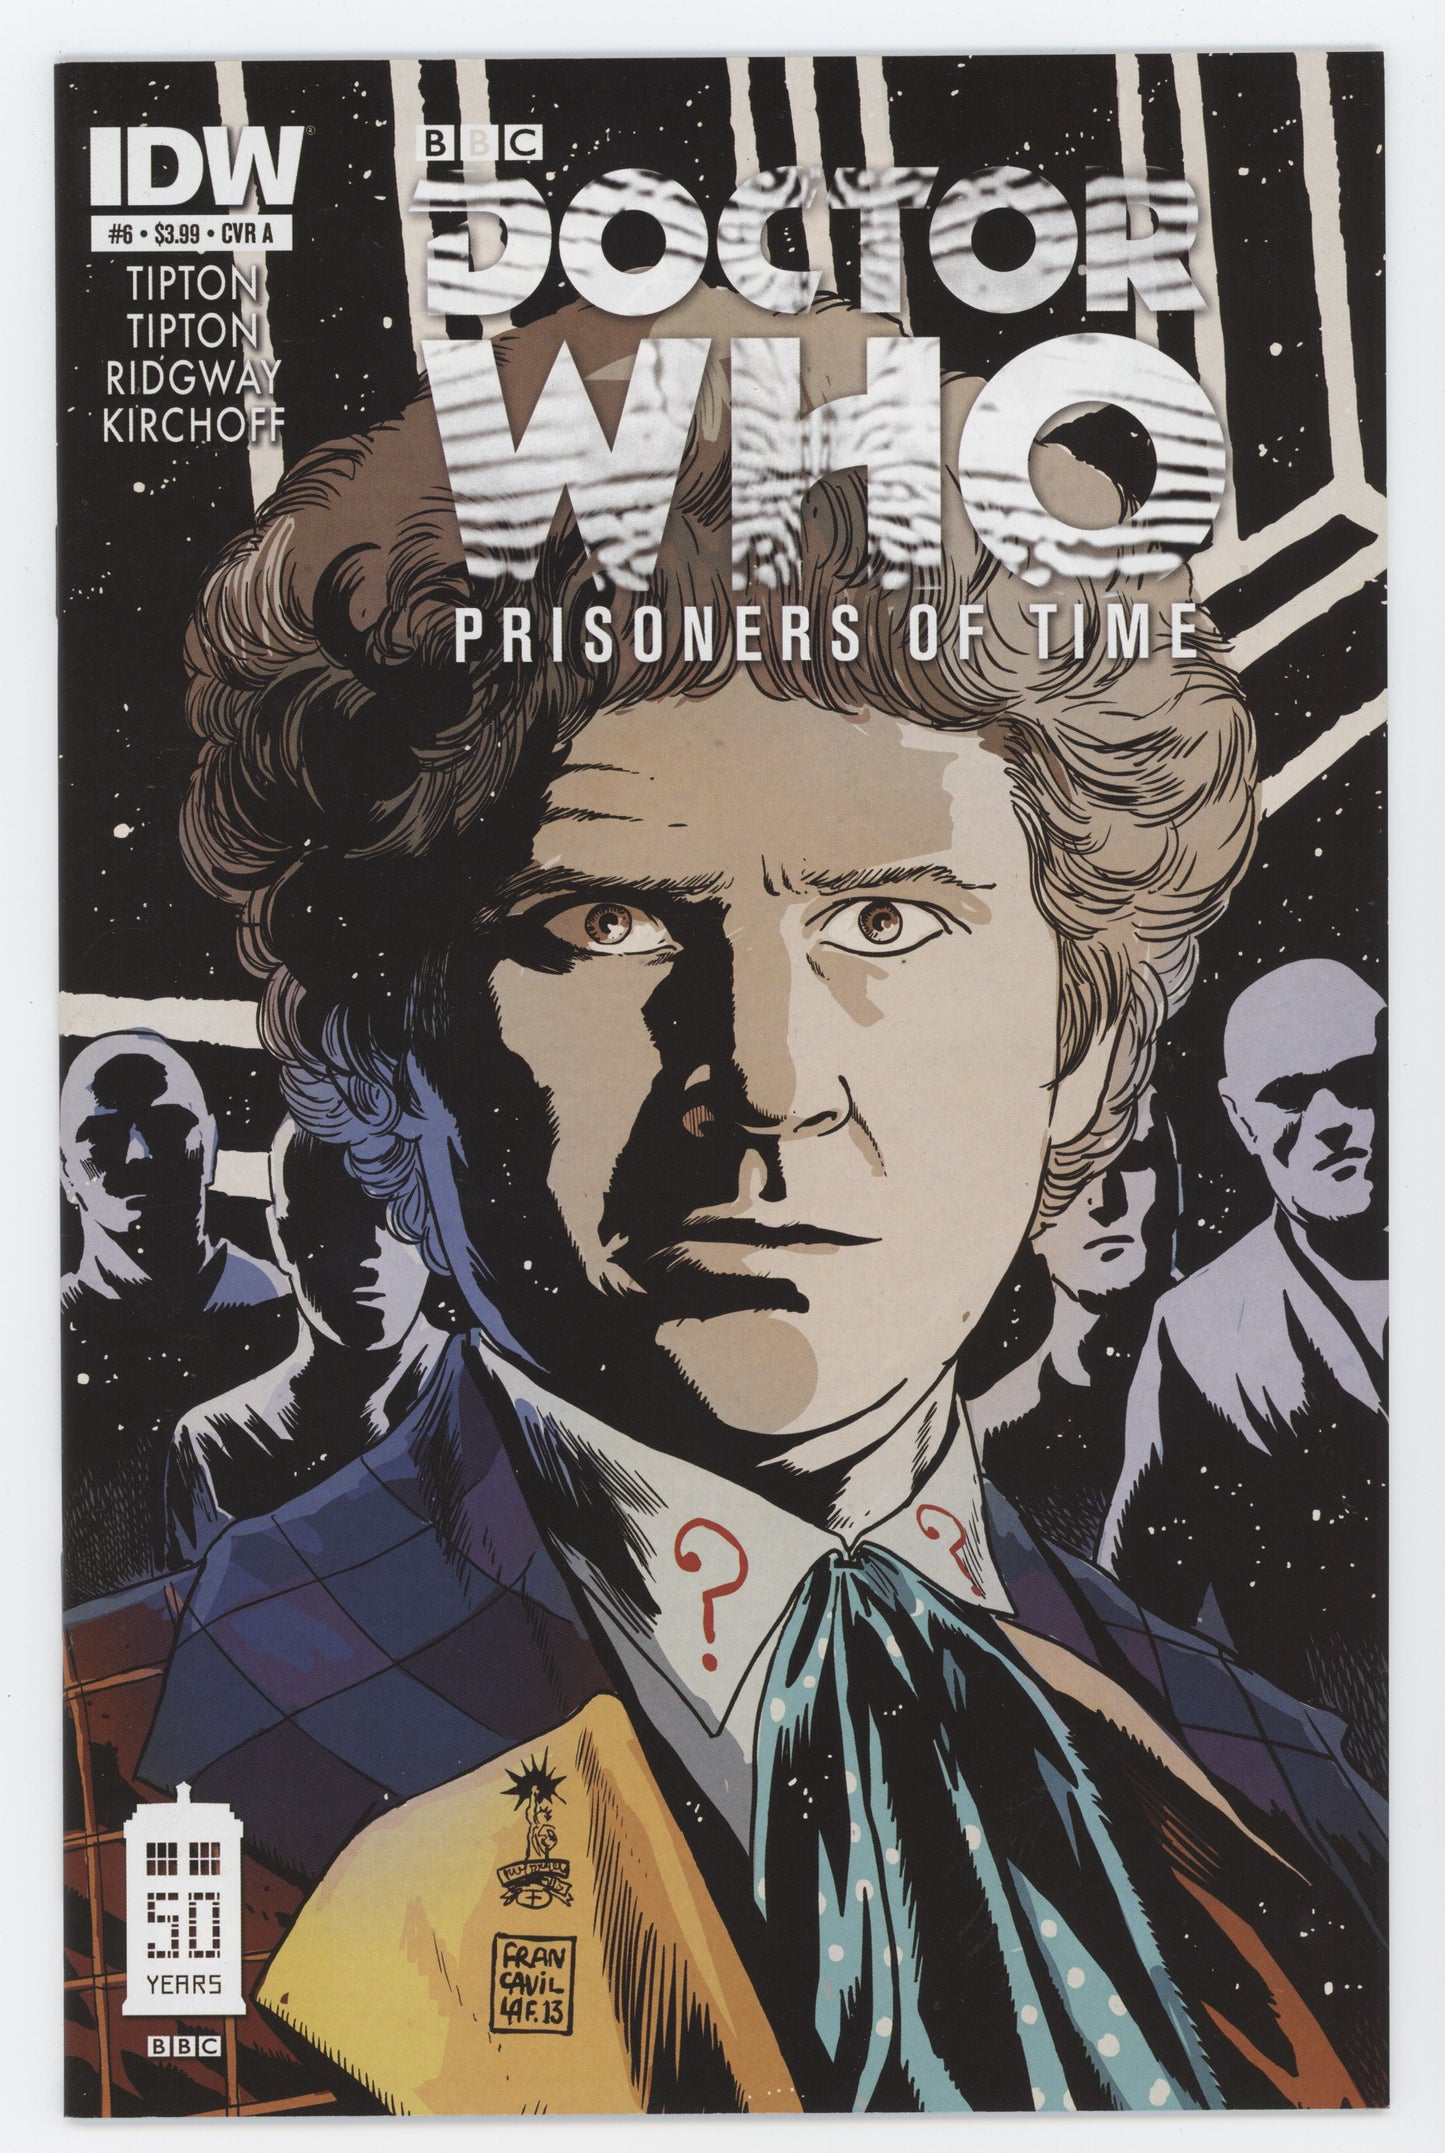 Doctor Who Prisoners Of Time #6 A (Of 12) IDW 2013 Francesco Francavilla